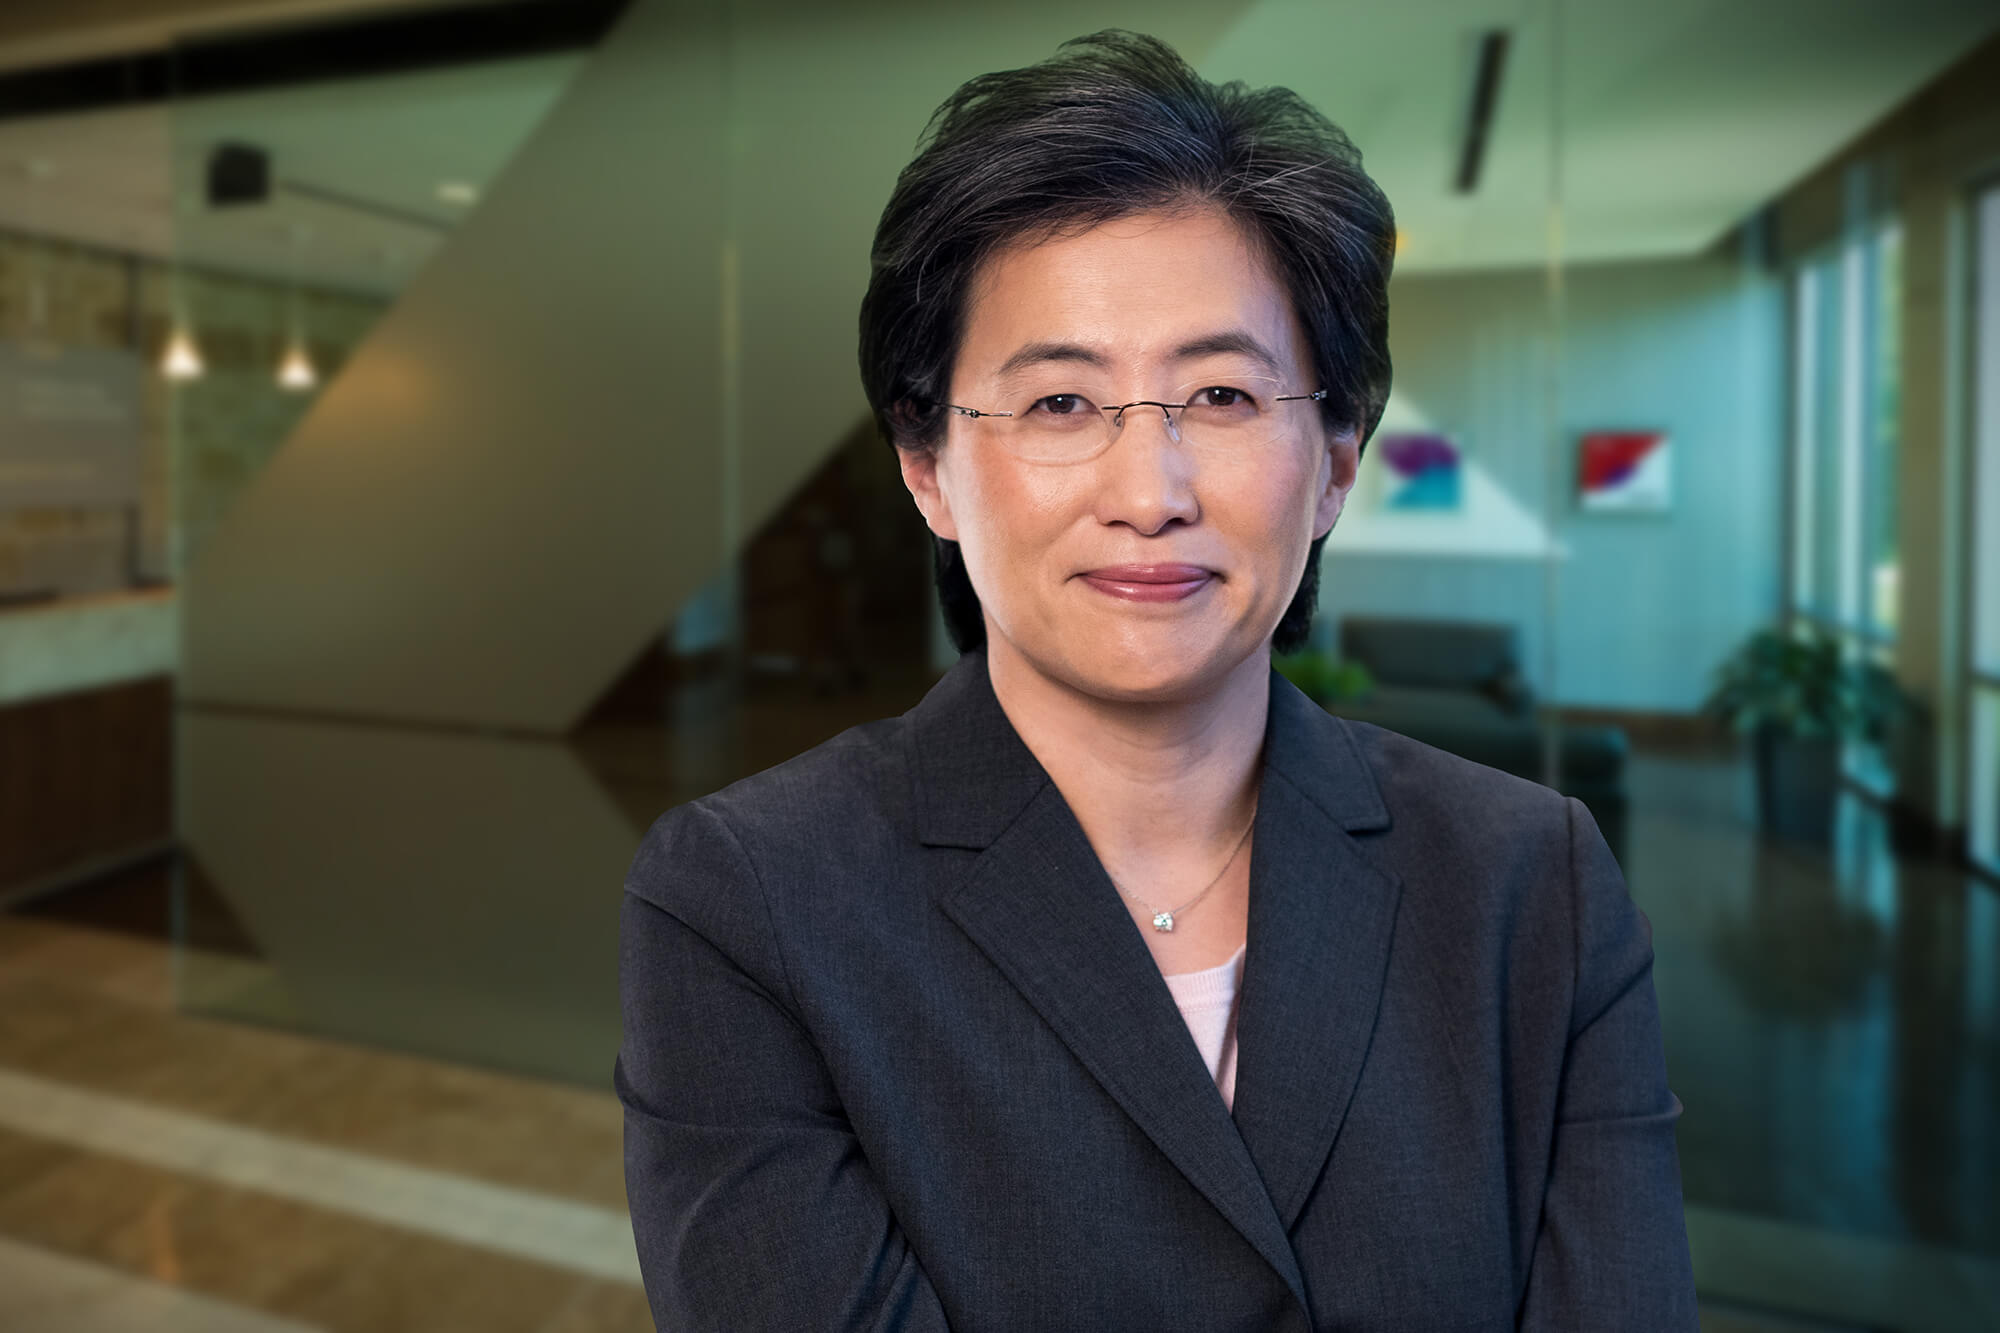 President Biden appoints AMD's Lisa Su to Council of Advisors on Science and Technology